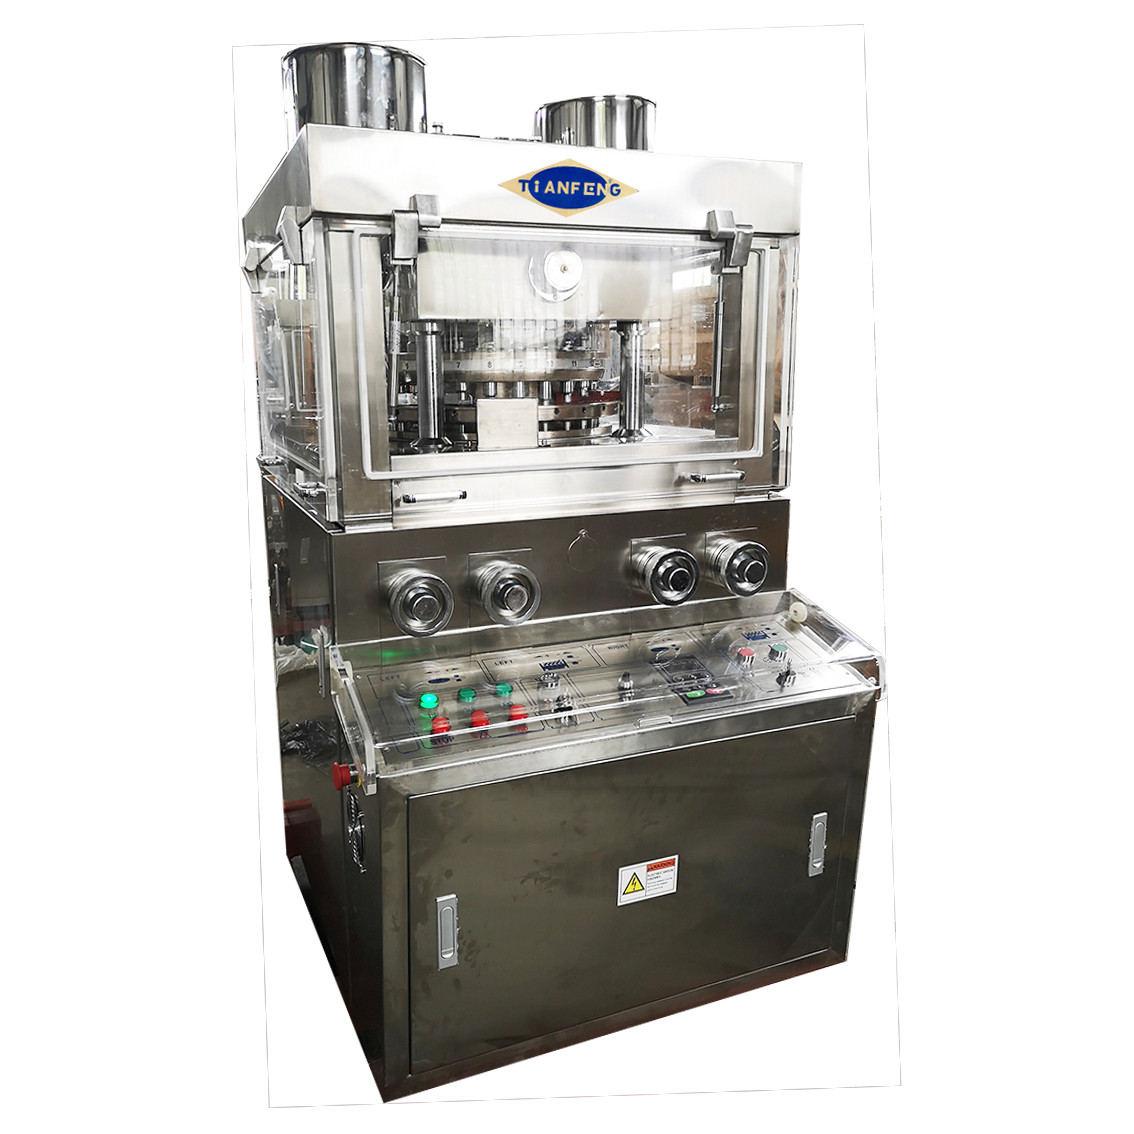 China 29 Dies Multifunctional Rotary Tablet Press Machine factory